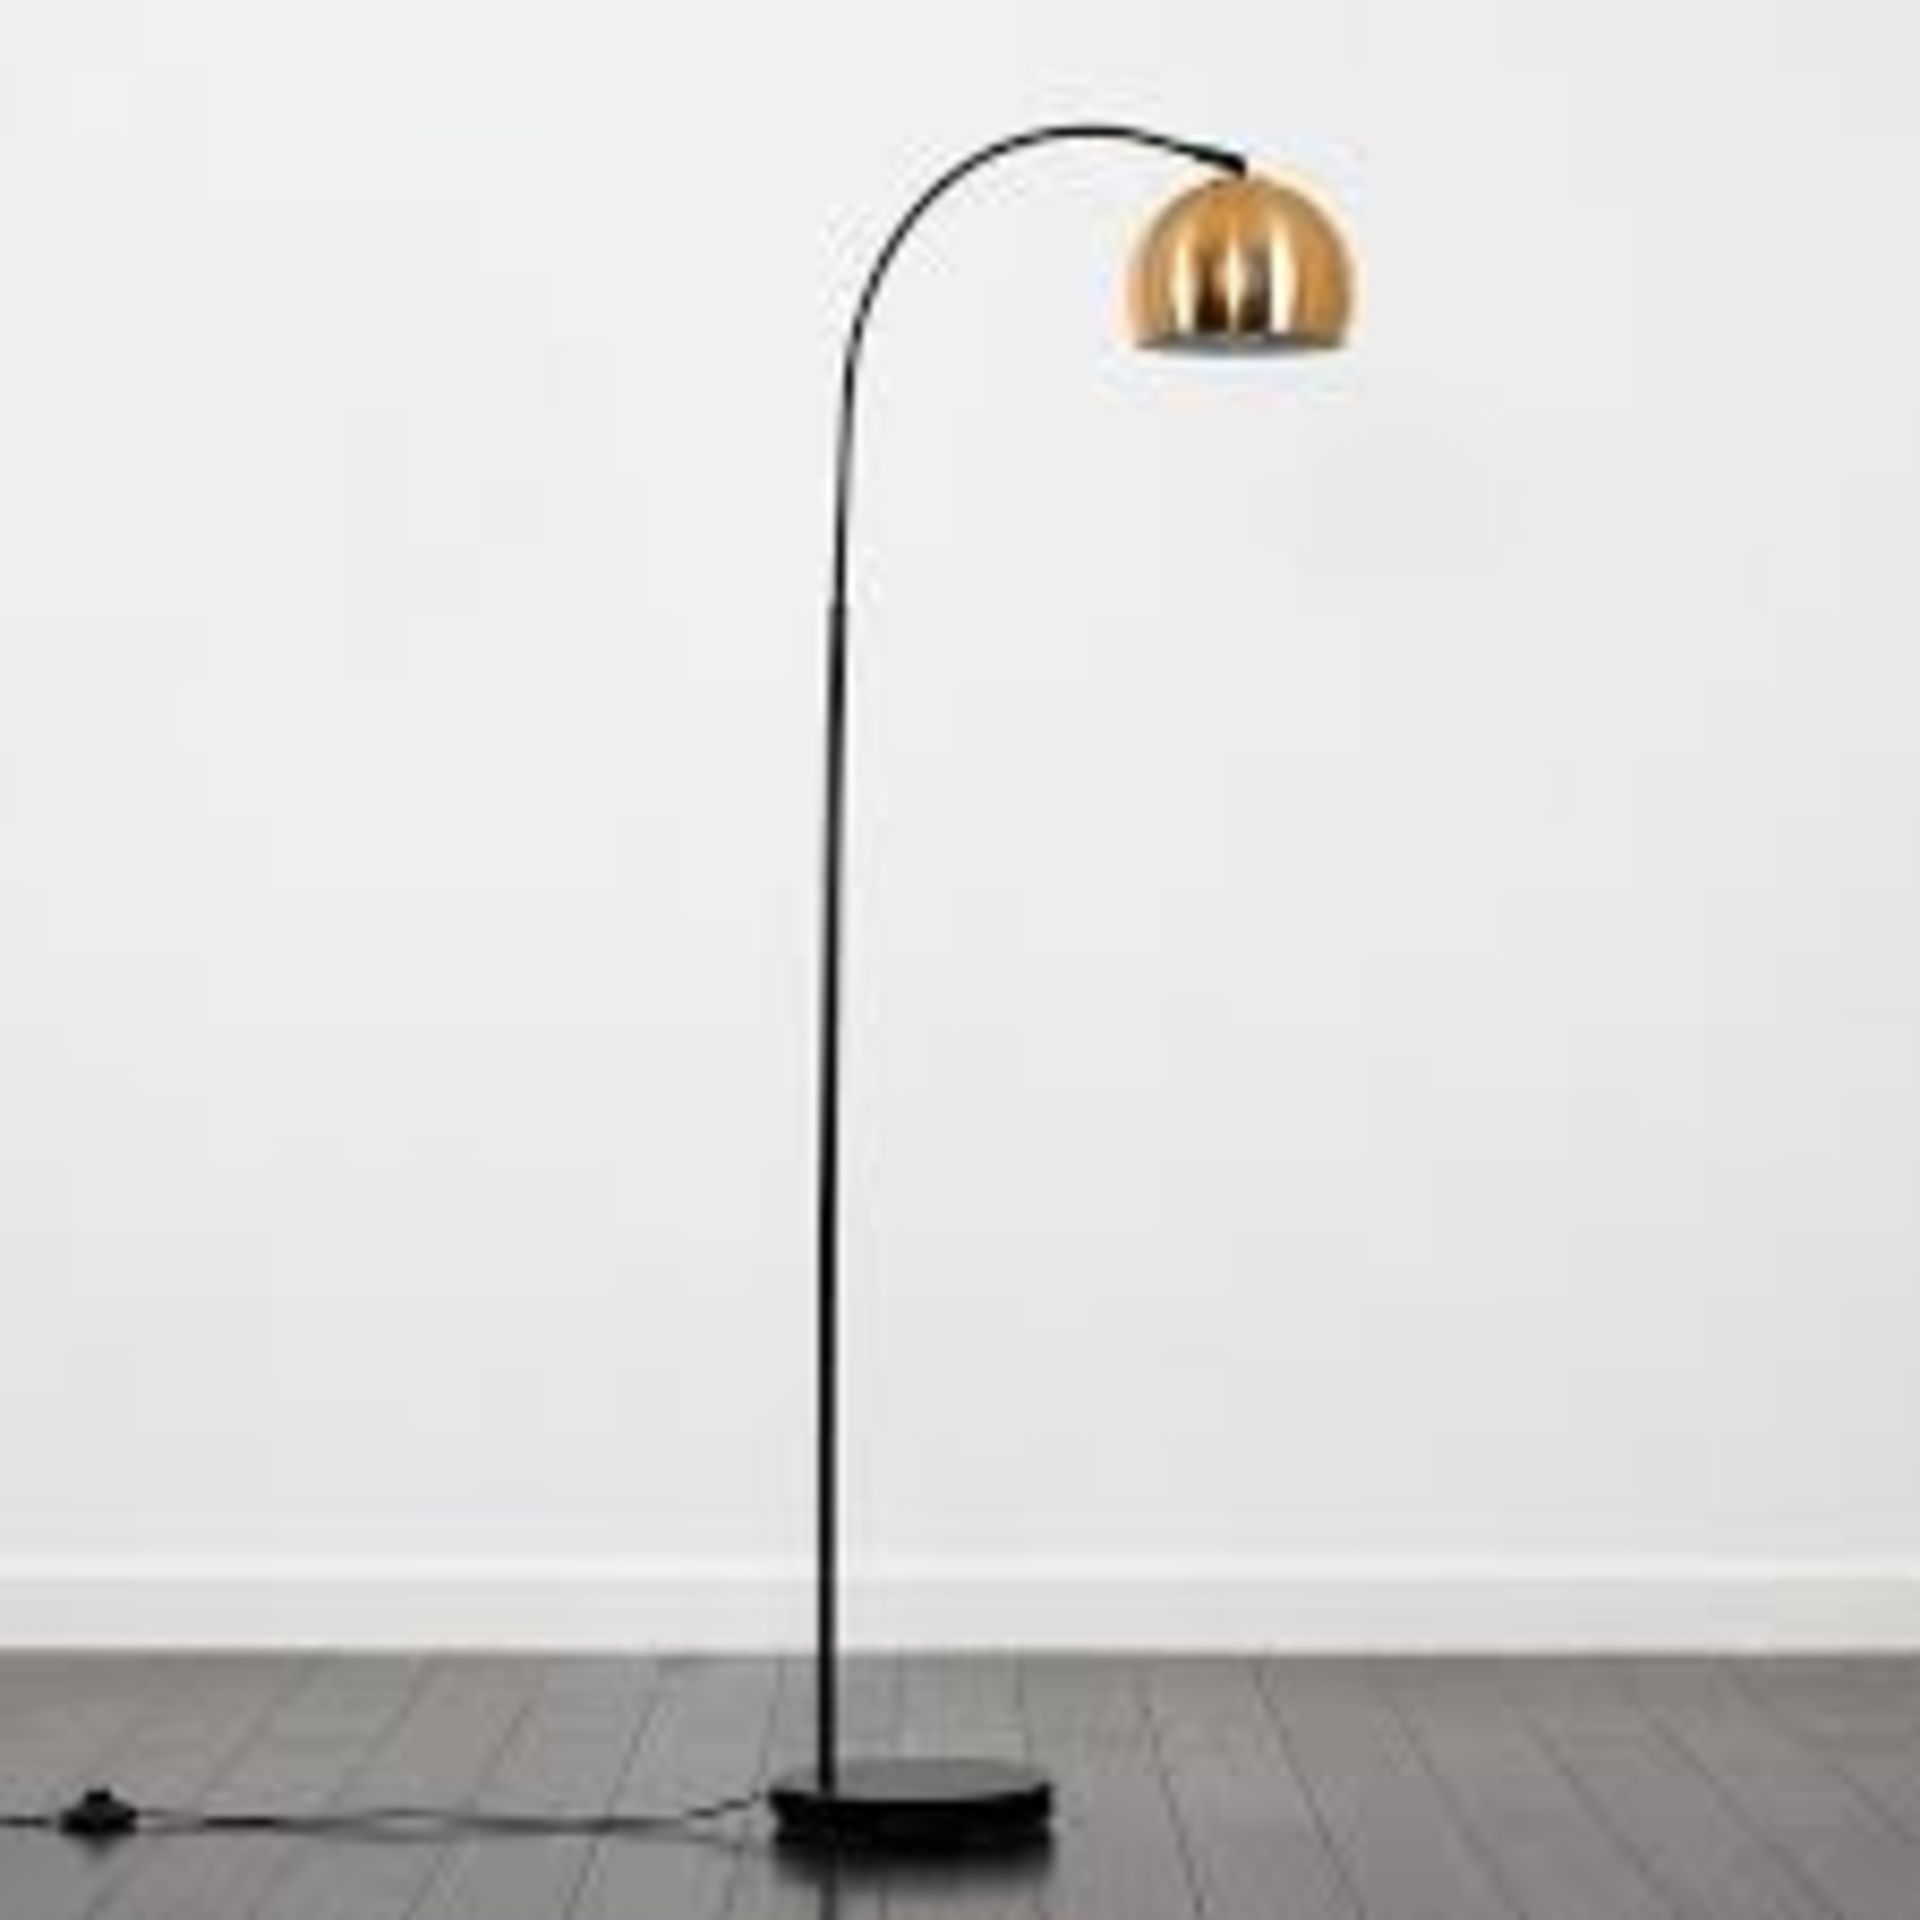 Boxed Masuda Arched Floor Lamp RRP £50 (18604) (Pictures Are For Illustration Purposes Only) (